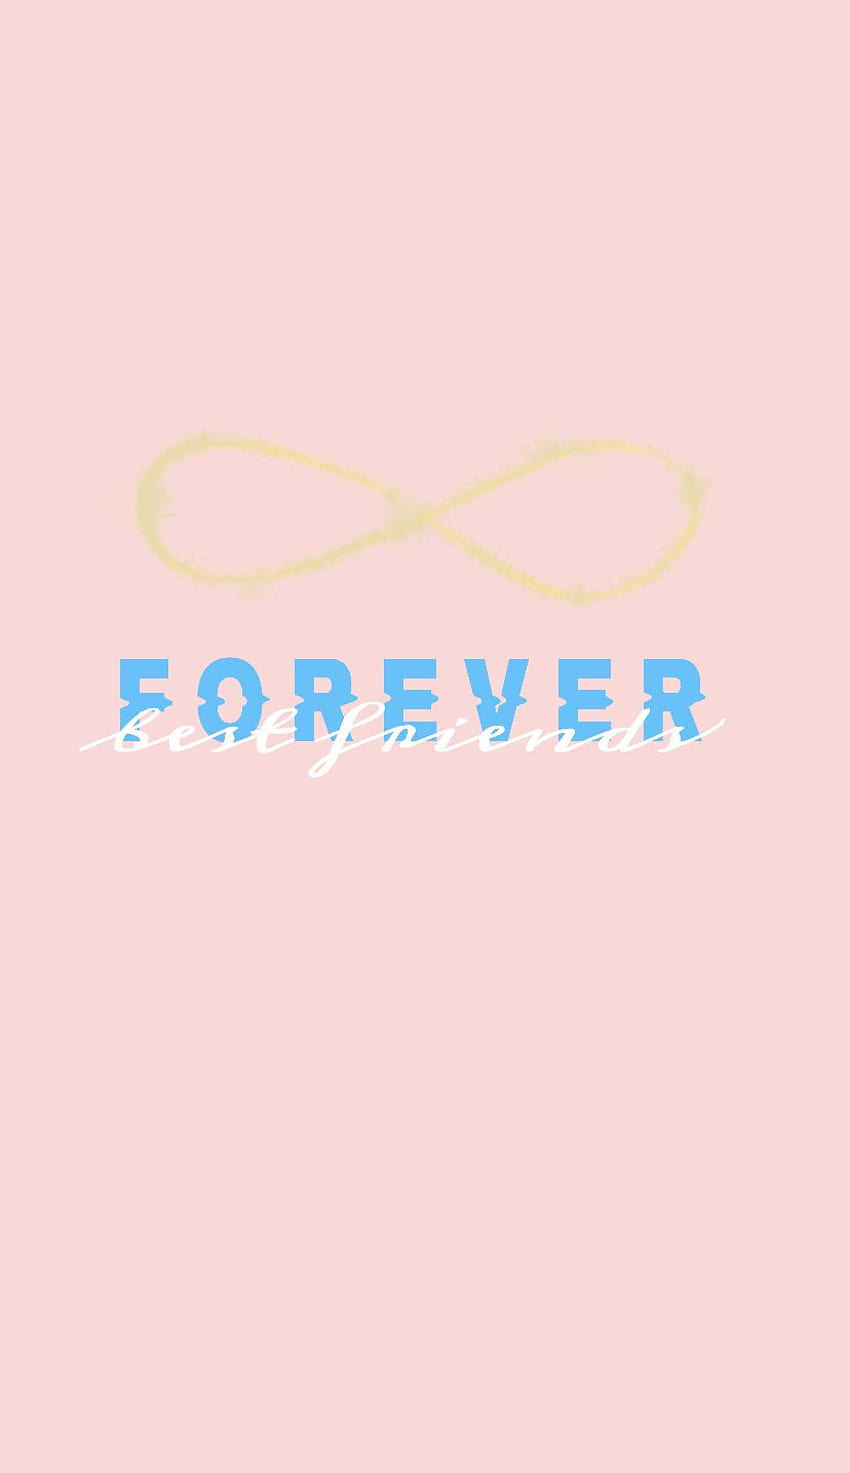 Forever wallpaper by MzwPetra  Download on ZEDGE  c3f4